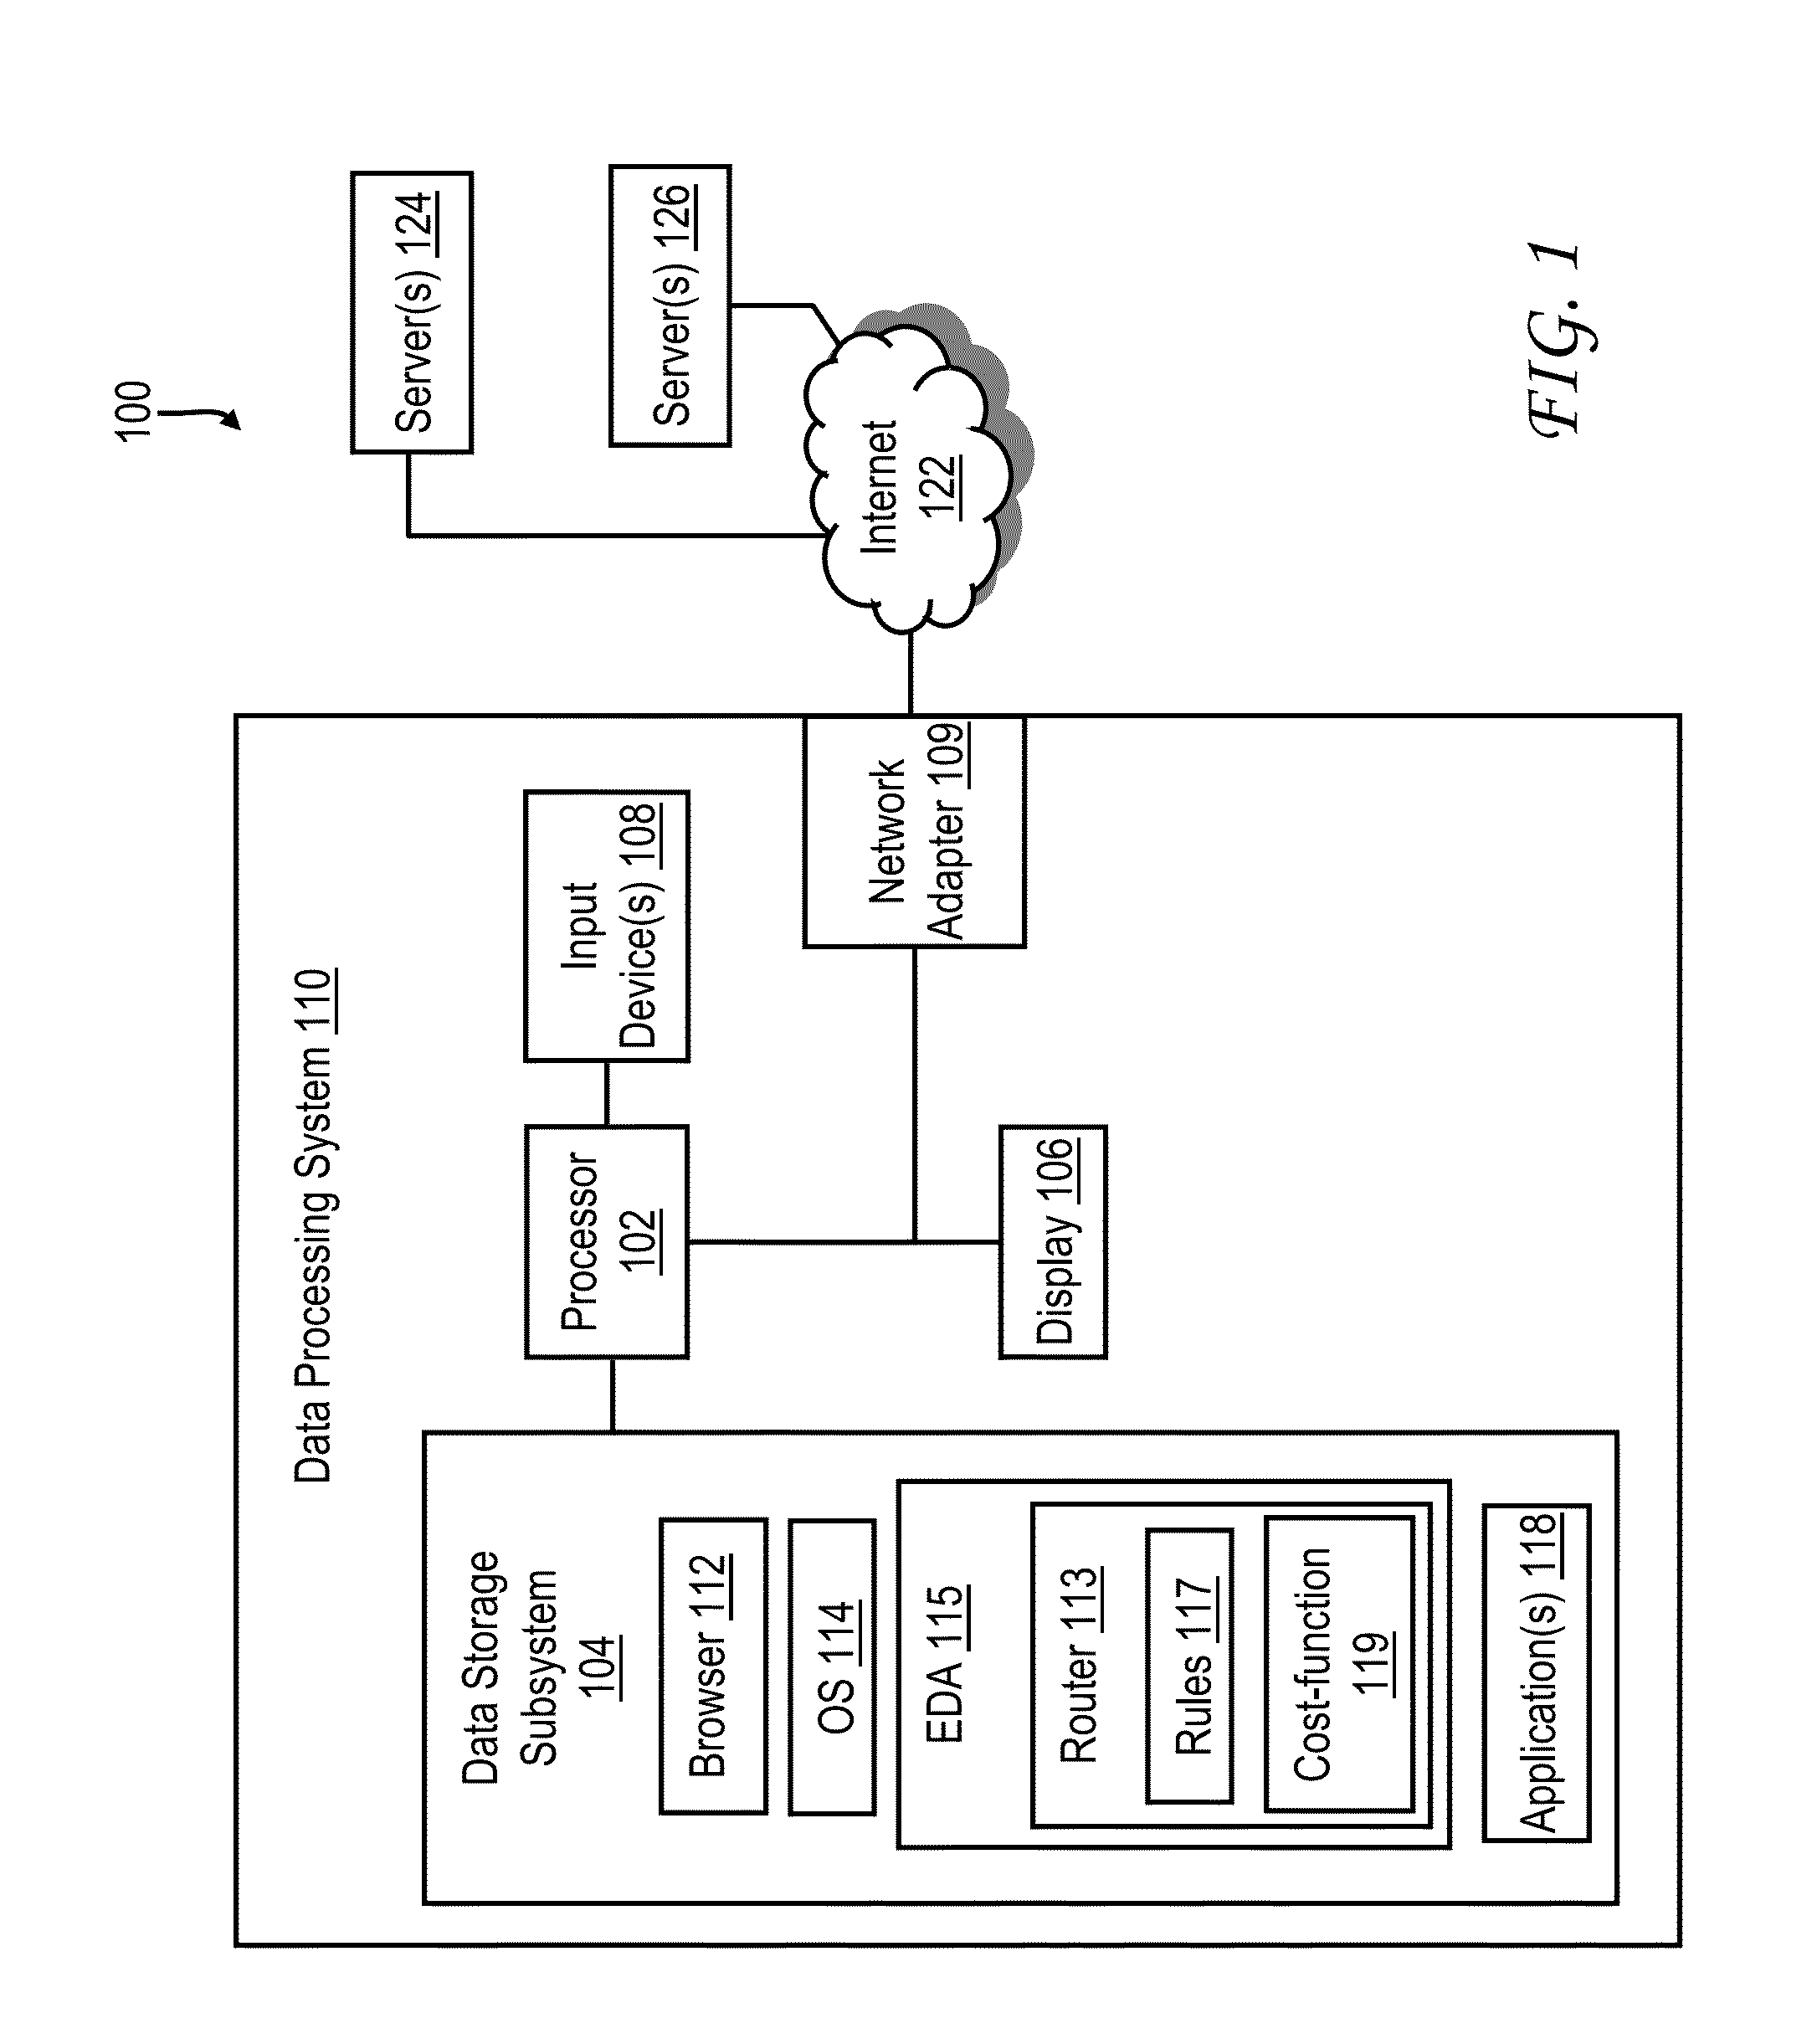 Cost-function based routing techniques for reducing crosstalk in electronic package designs